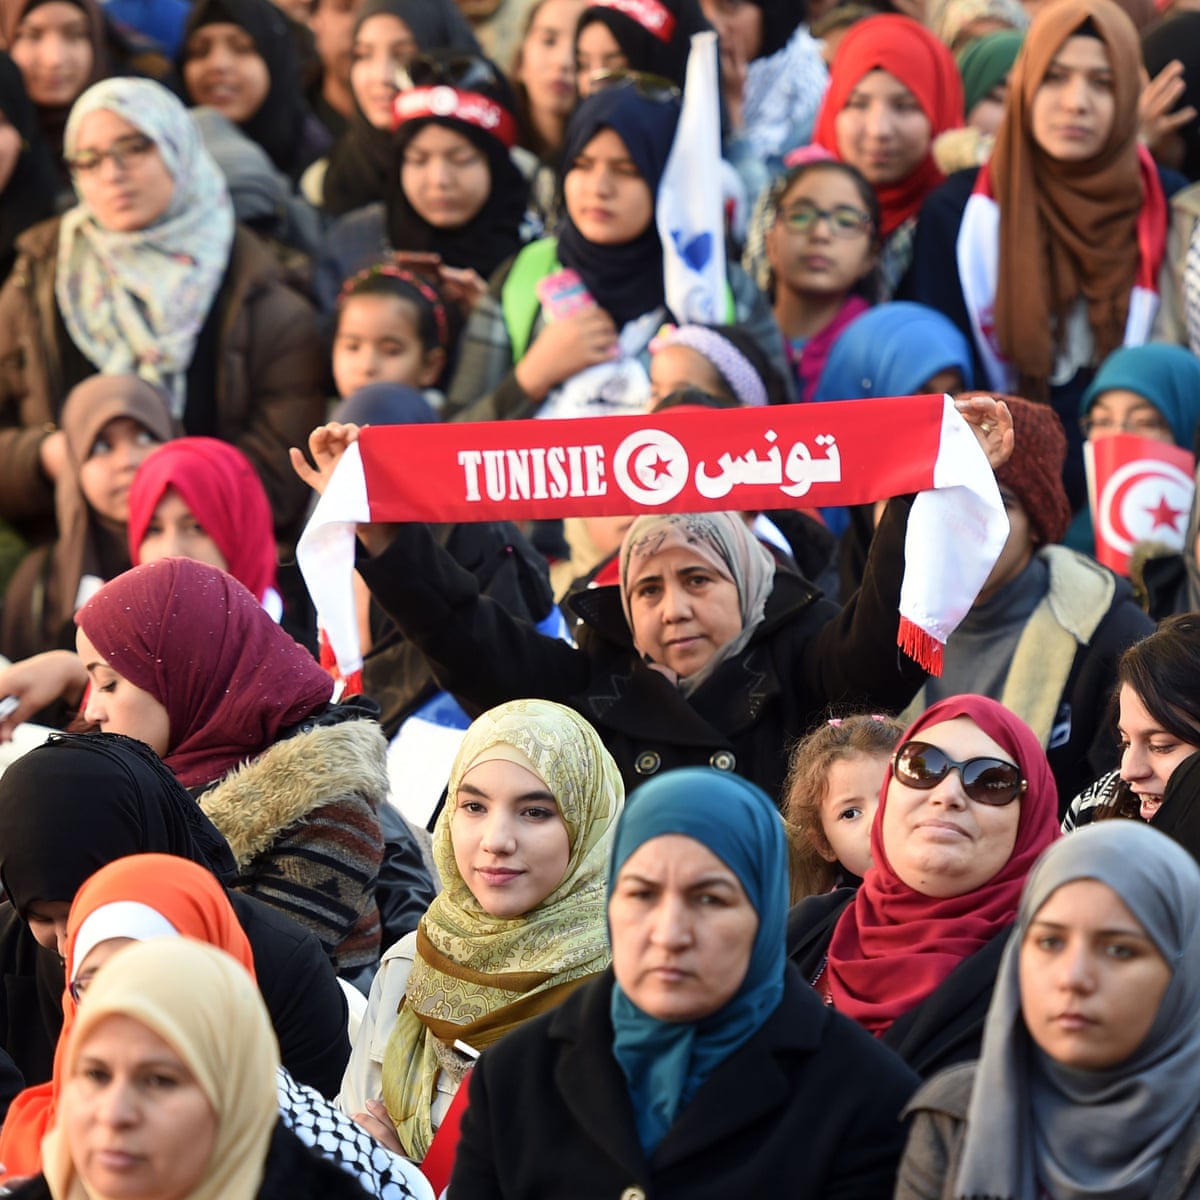 Tunisian coalition party fights for women's rights with gender violence  bill | Sexual violence | The Guardian